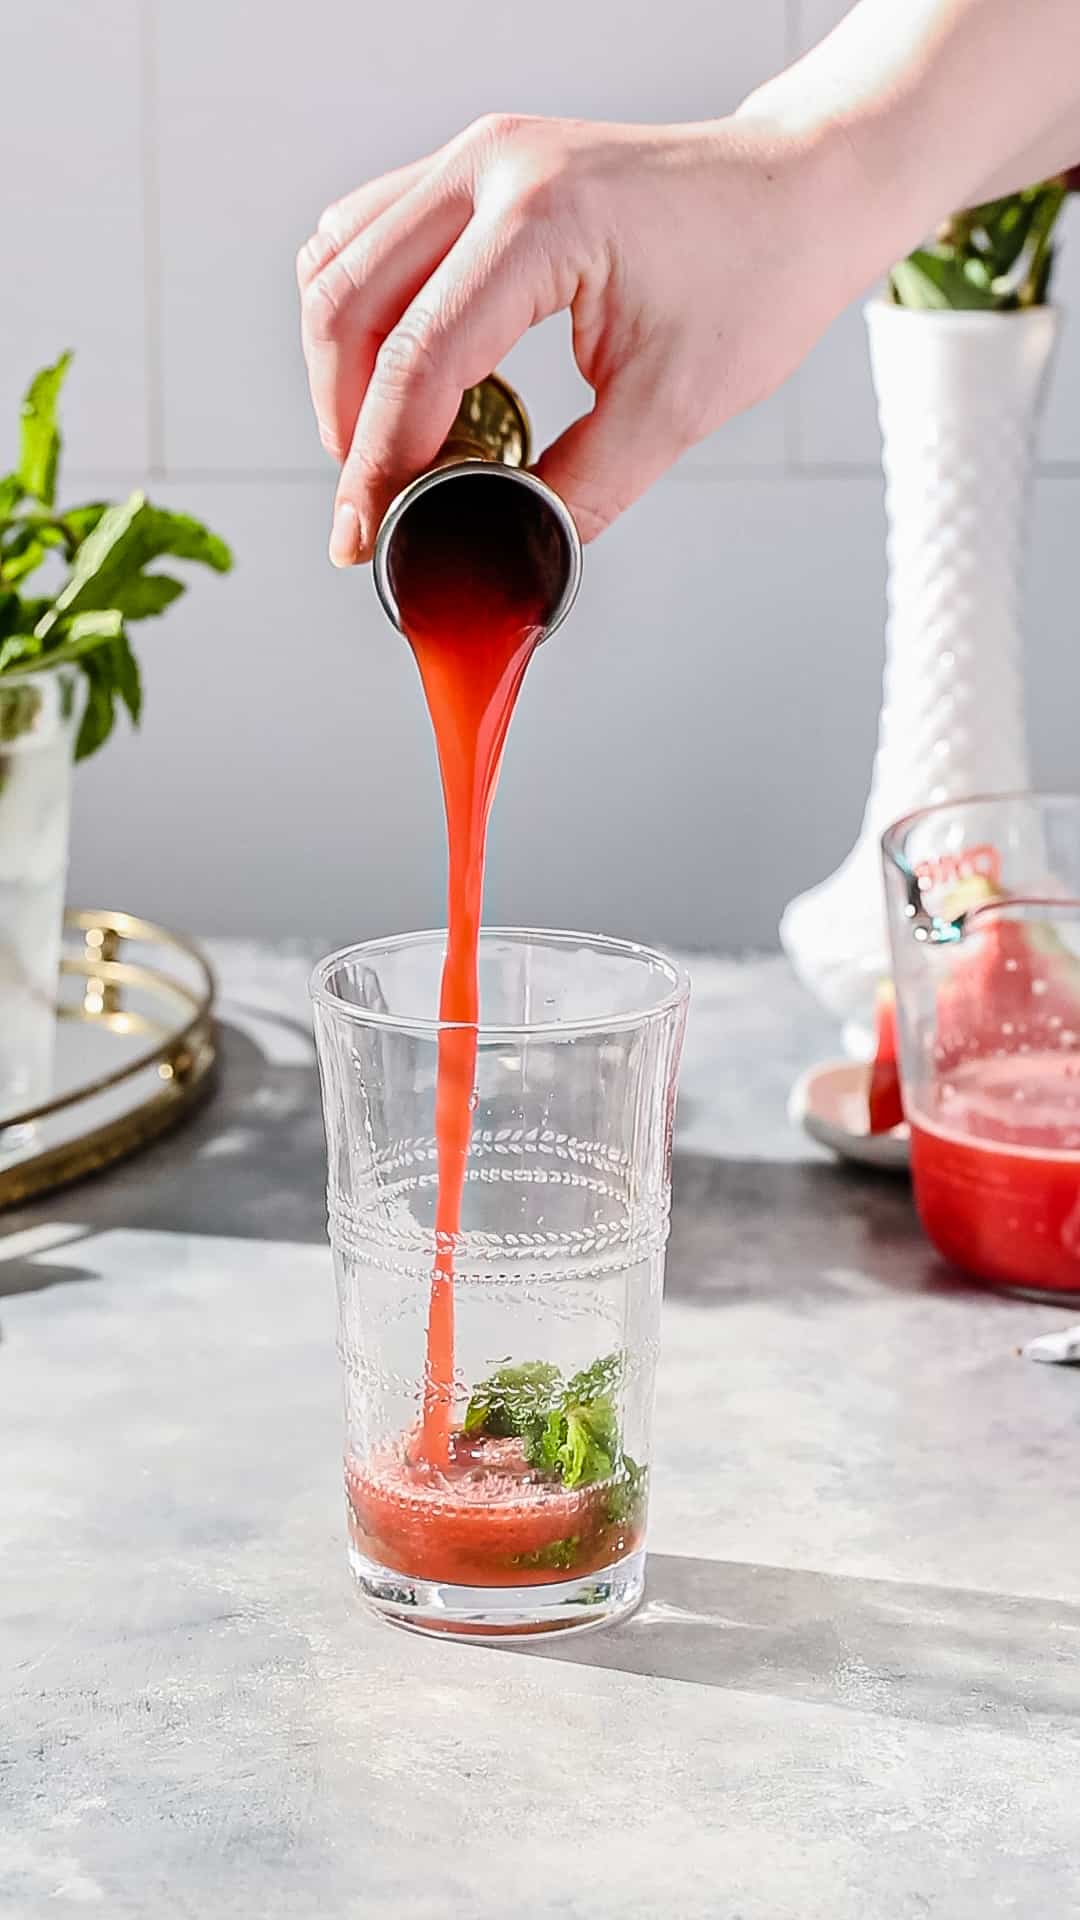 Hand using a jigger to add watermelon juice to a cocktail glass filled with mint, sugar and lime juice.